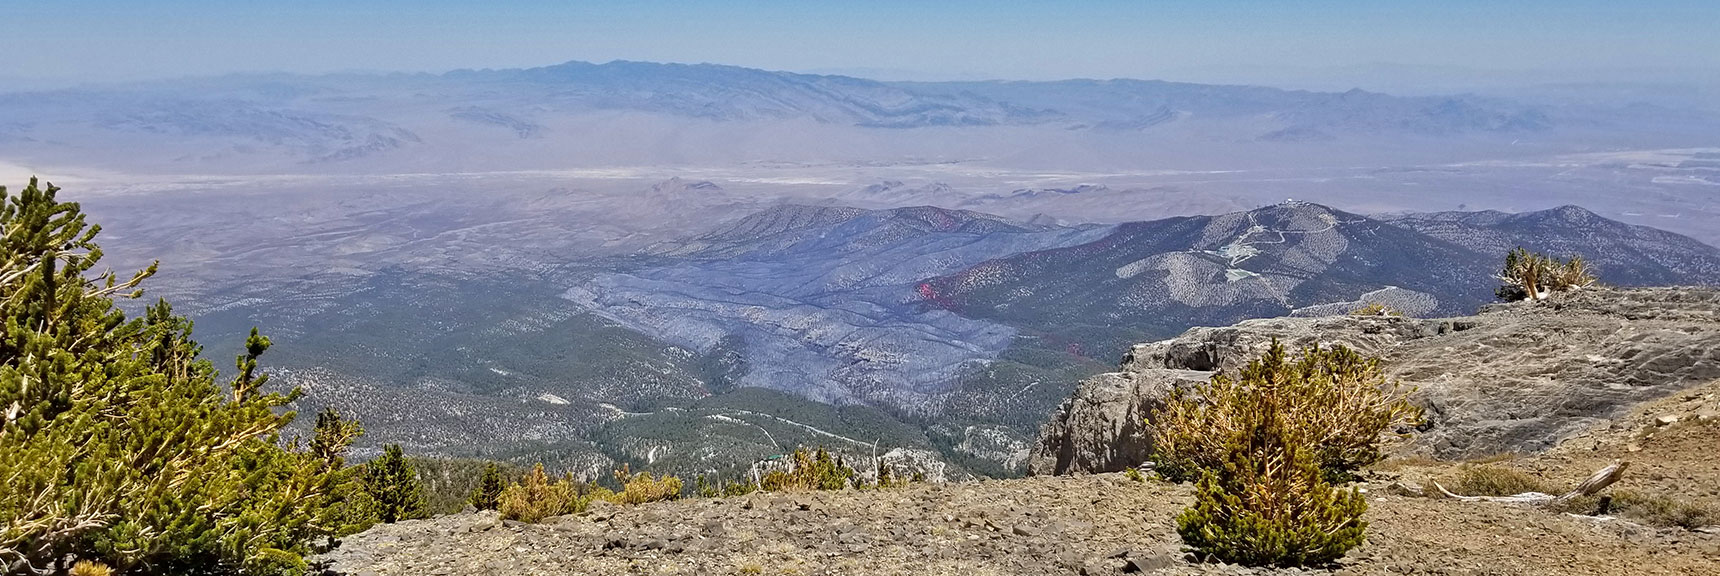 June 2020 Burn Area at Base of Charleston Observatory 2 Weeks After Burn | Mummy Mountain Adventure with Glenn & Shoshi Hall, Spring Mountains Wilderness, Nevada 010